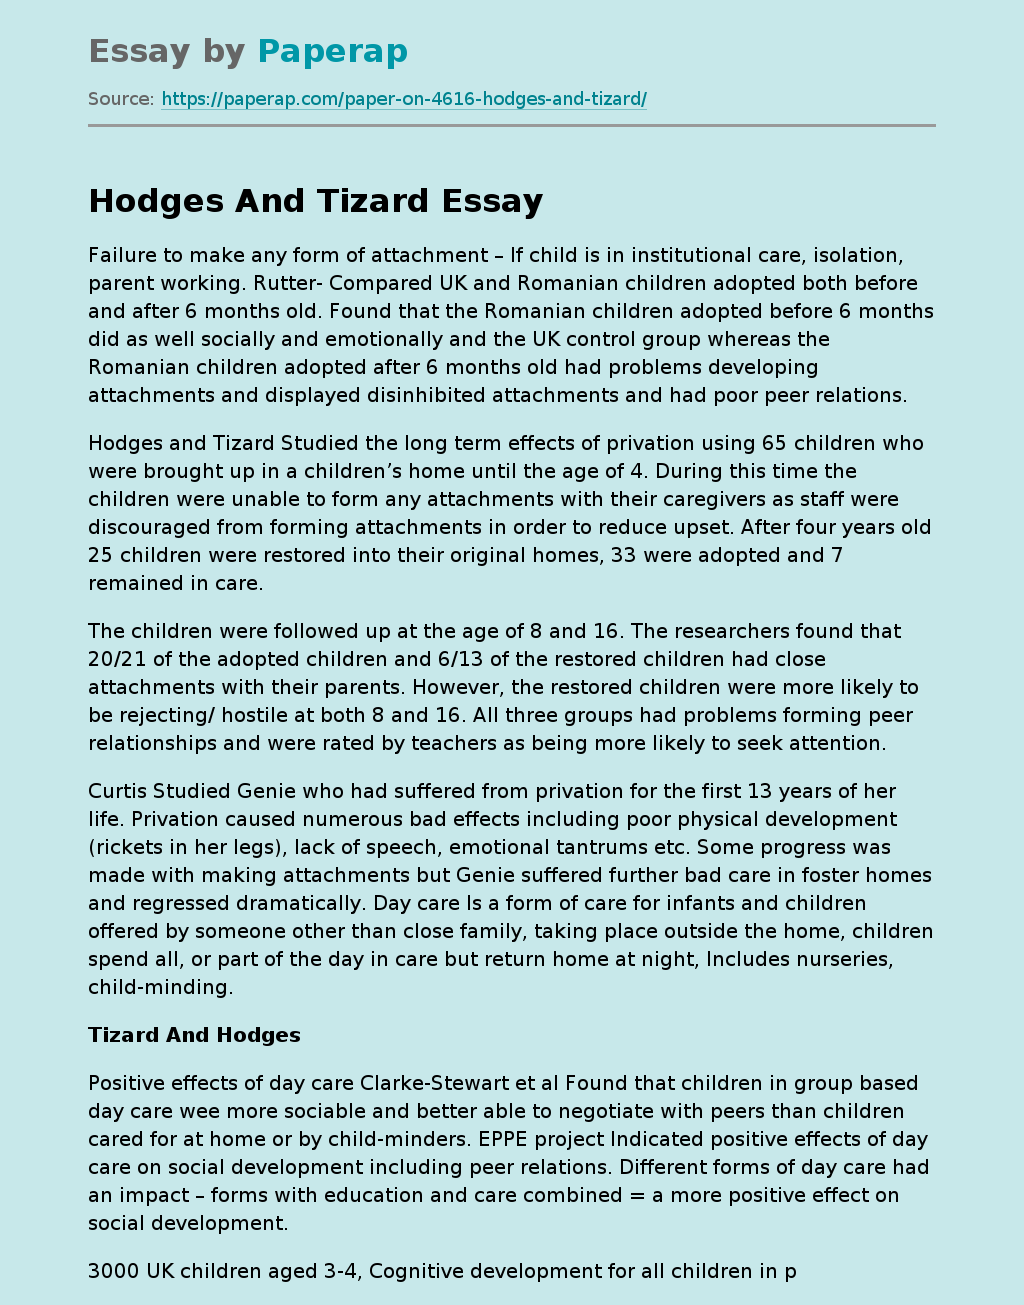 Hodges And Tizard